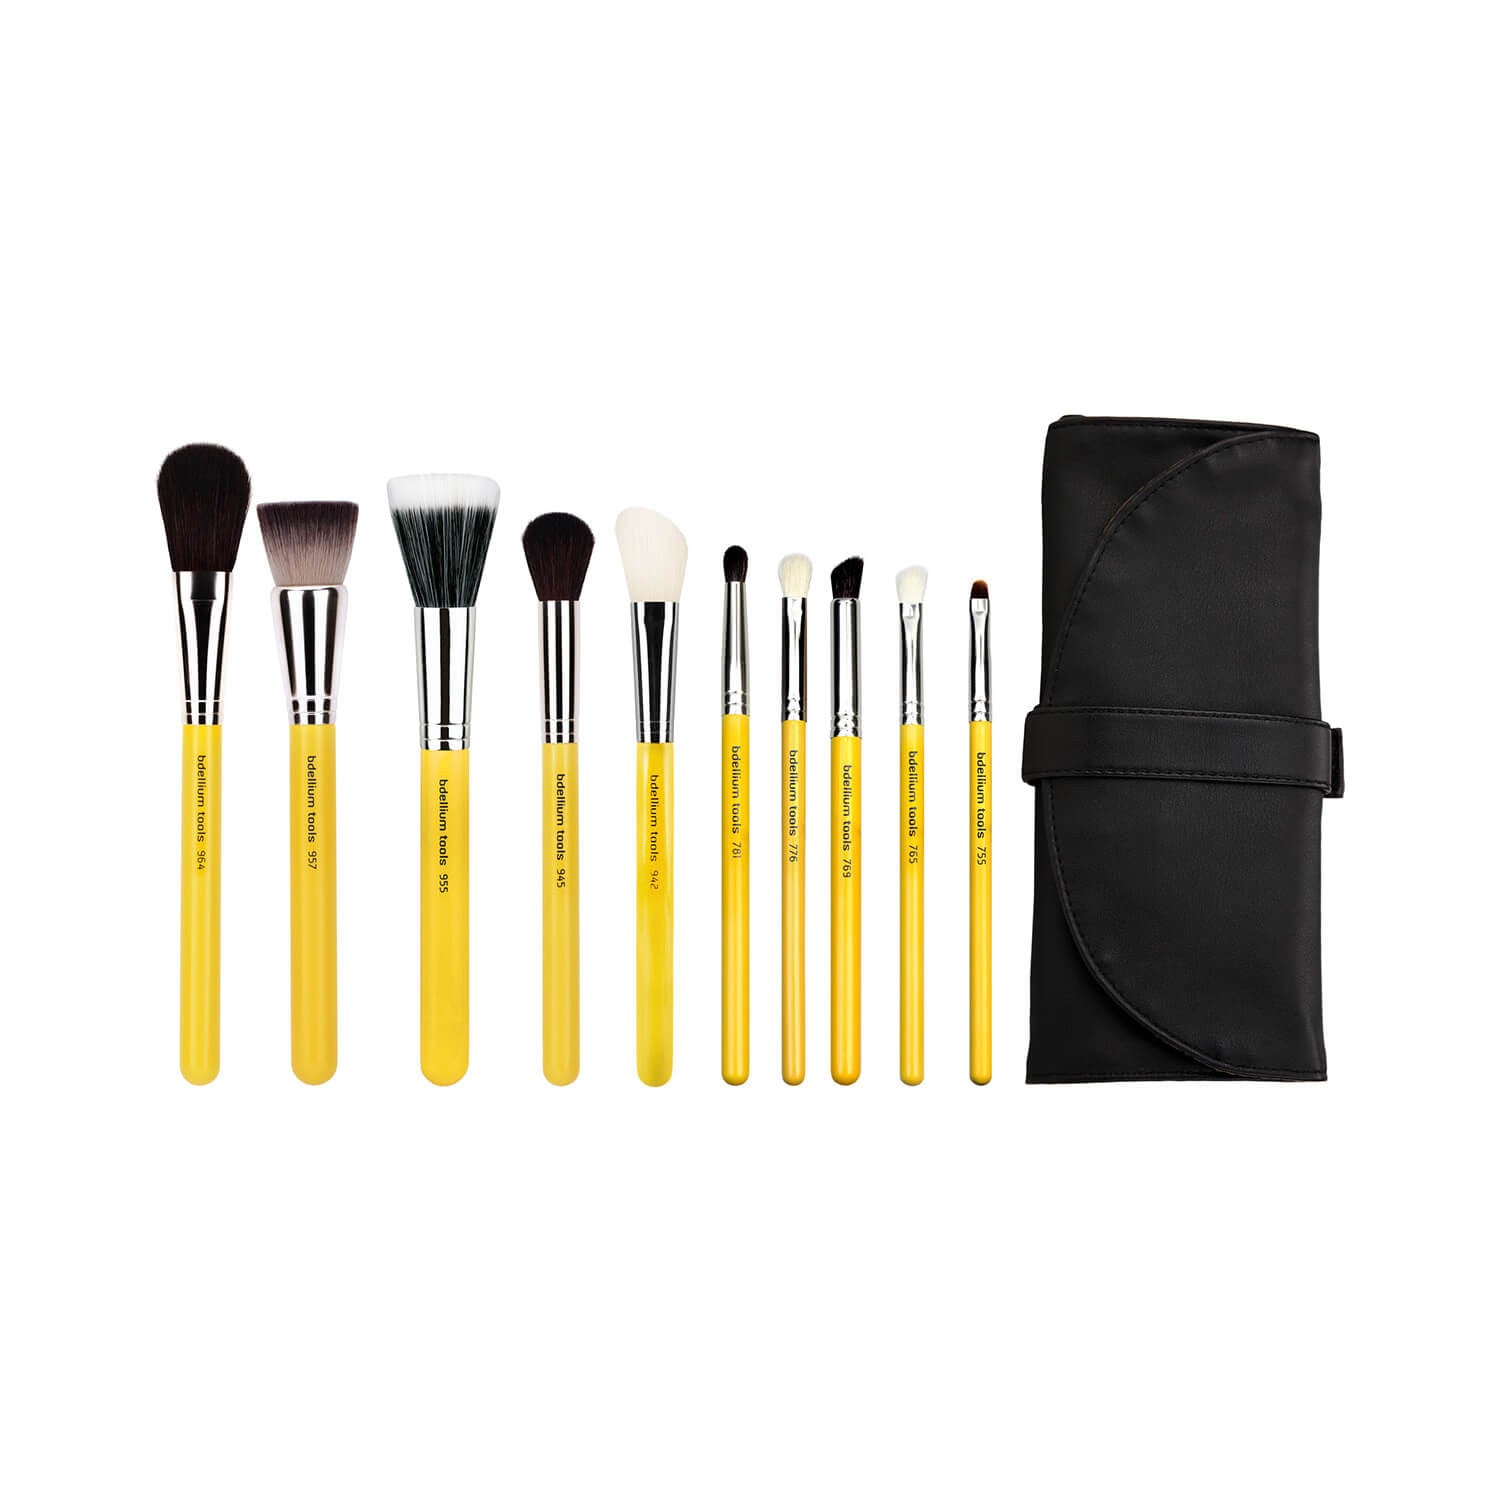 BDellium Tools Studio Mineral 10pc. Brush Set with Roll-up Pouch